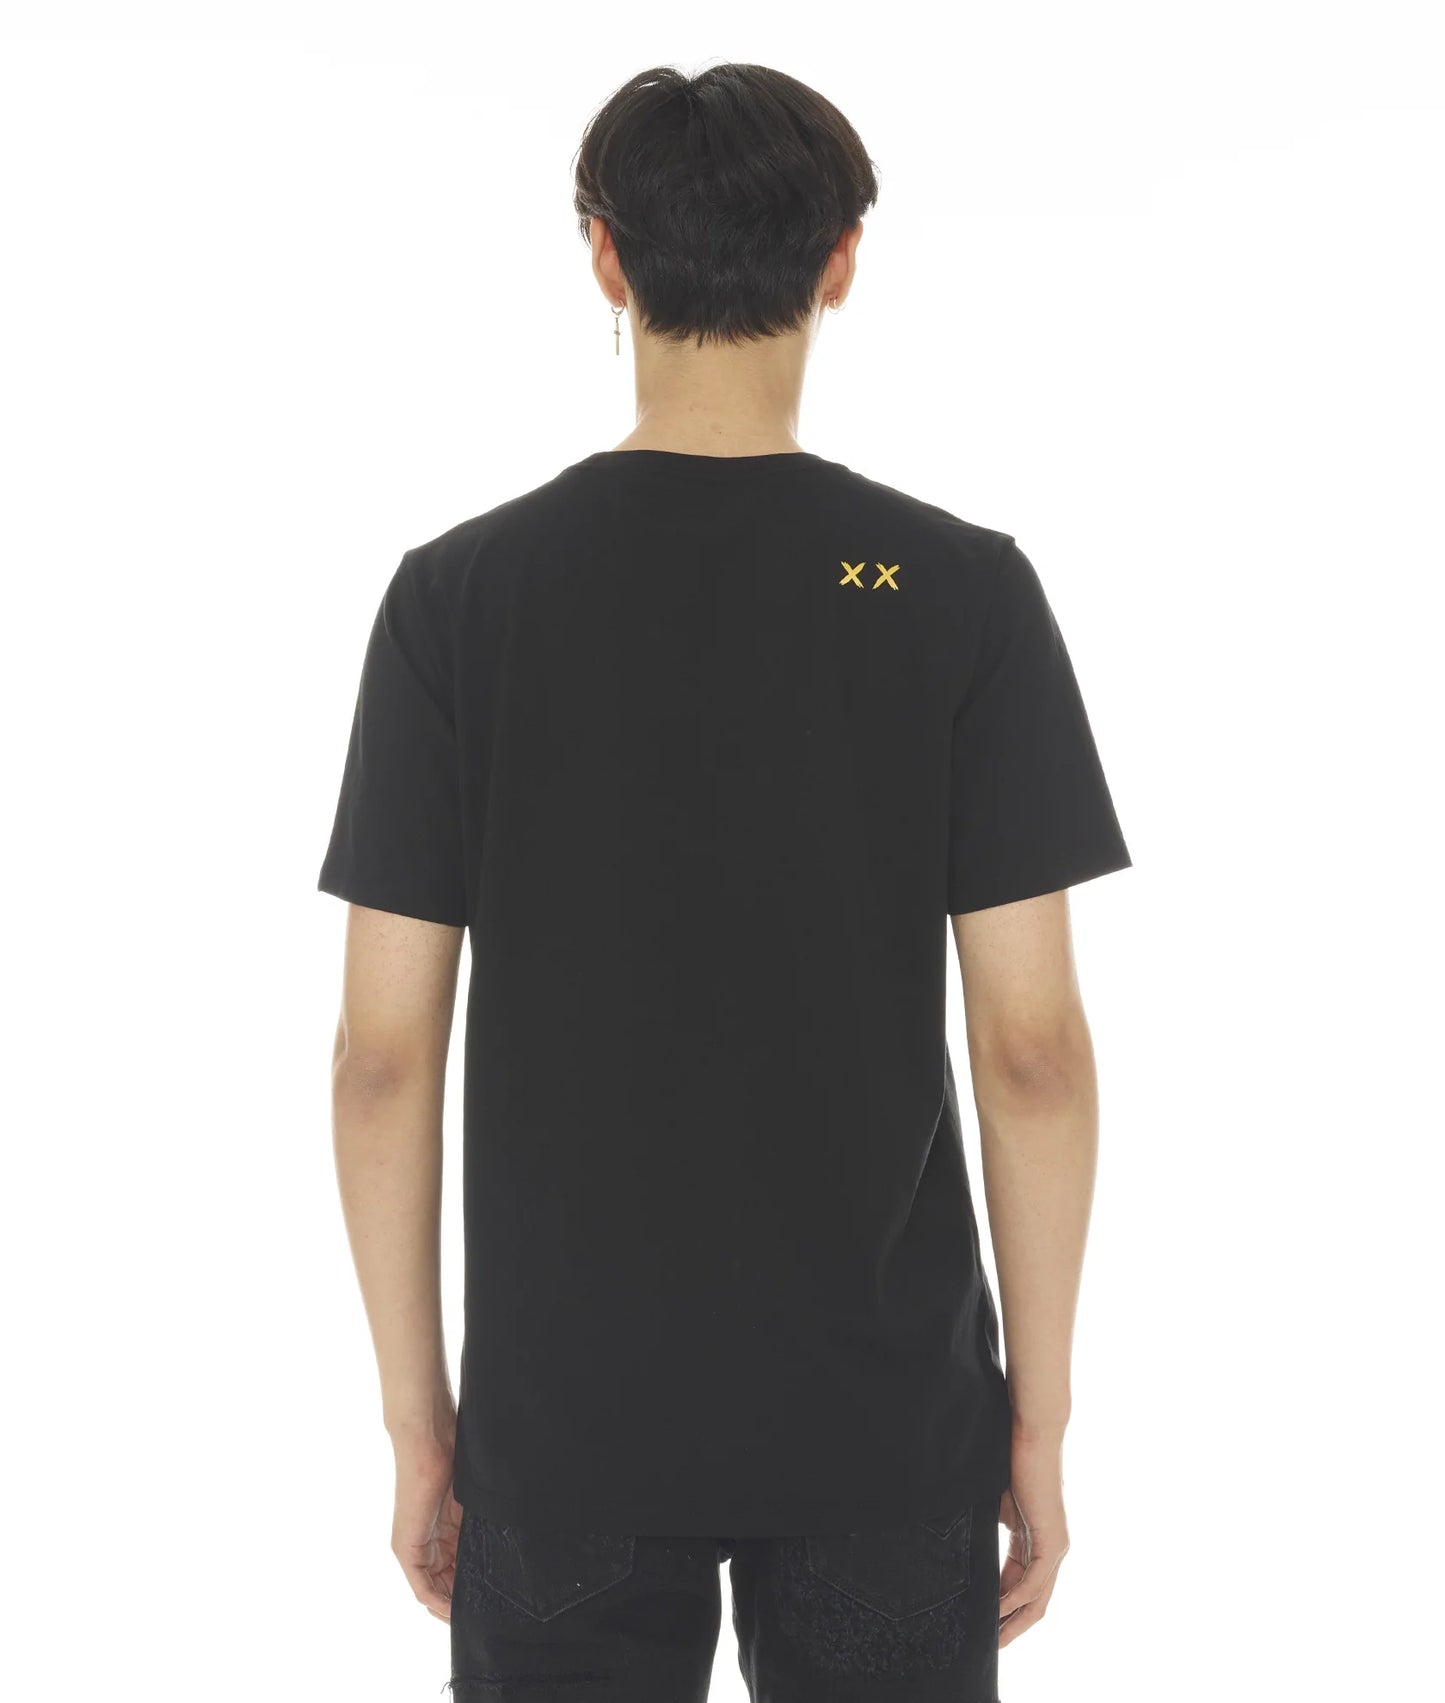 SHORT SLEEVE CREW NECK TEE "GET OUT" IN BLACK